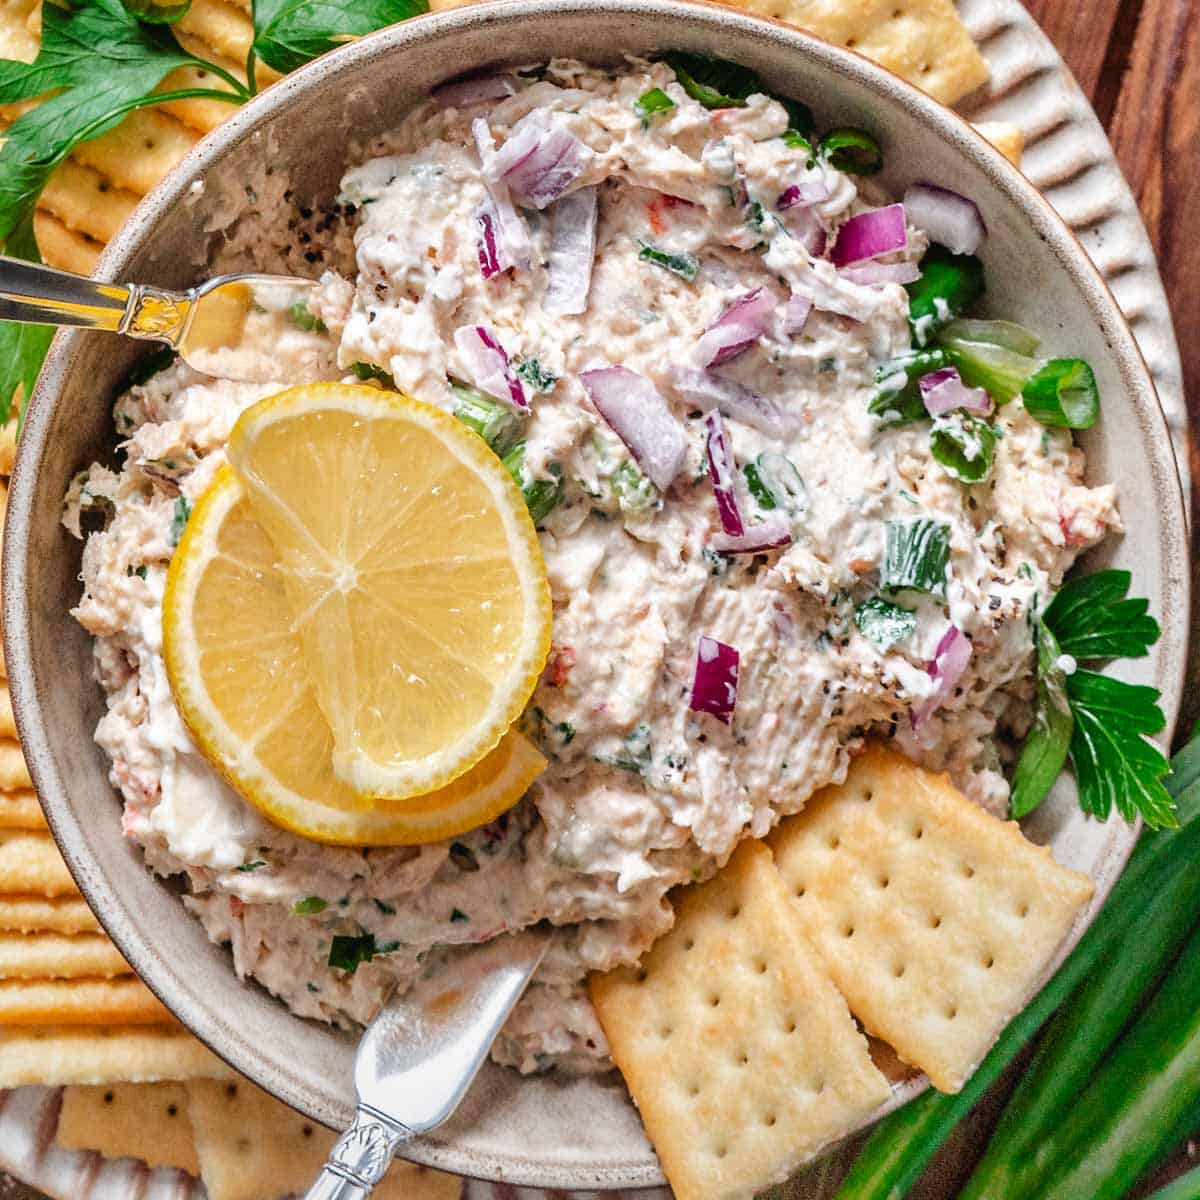 Fish dip with crackers